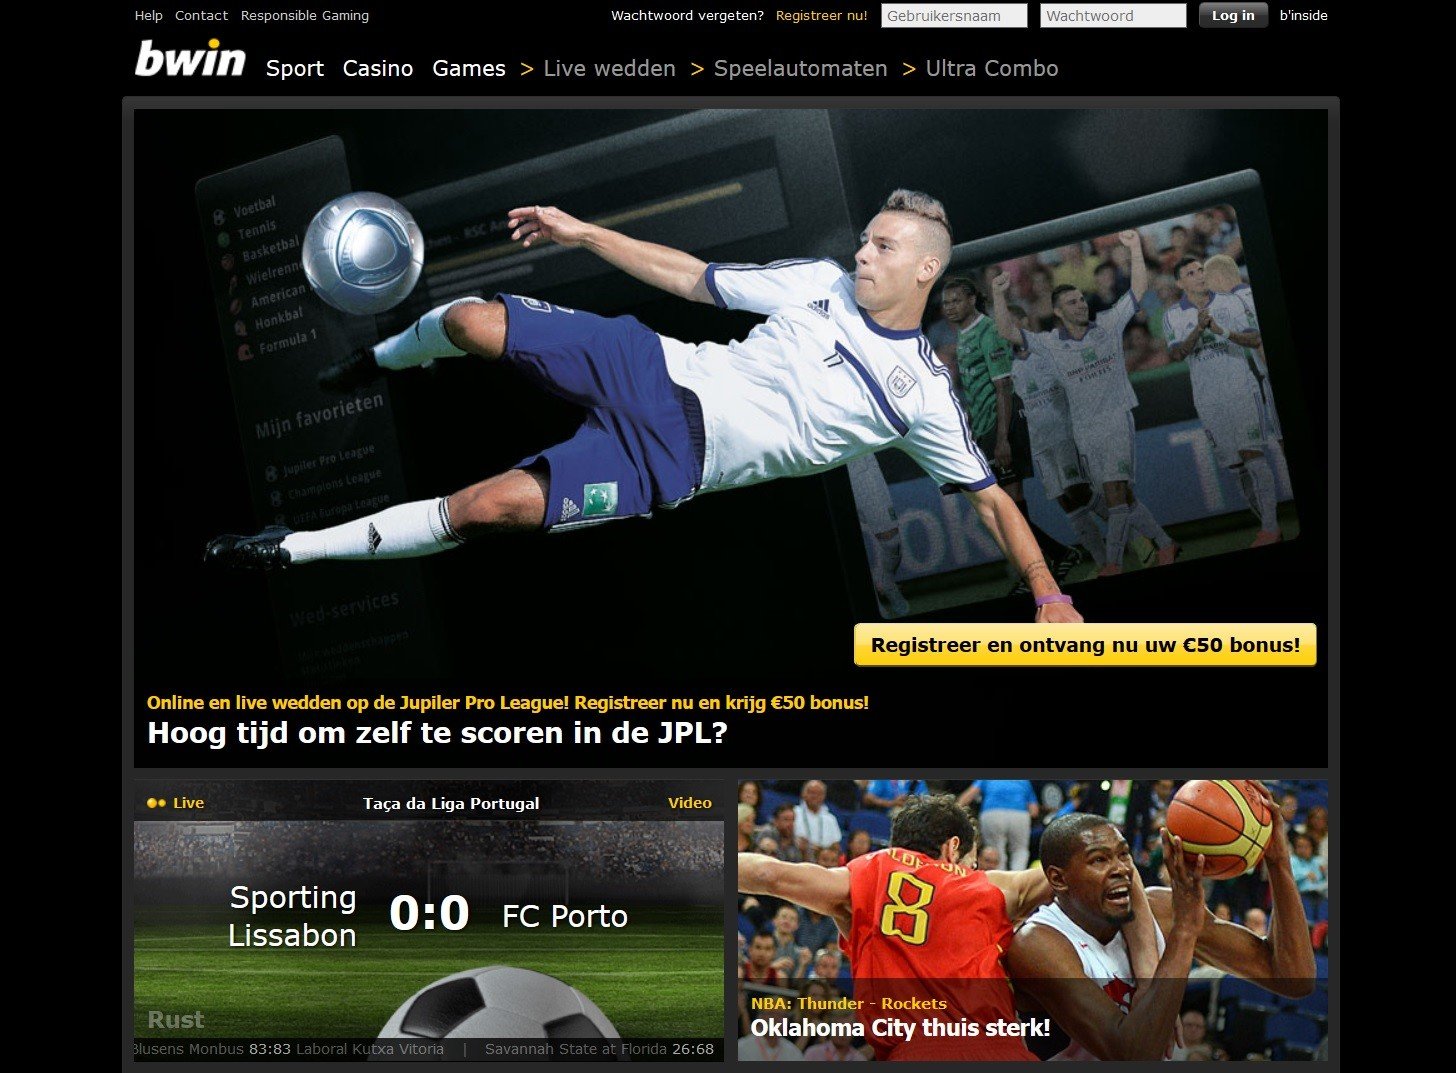 Place2bet € 5 free bets on BWIN